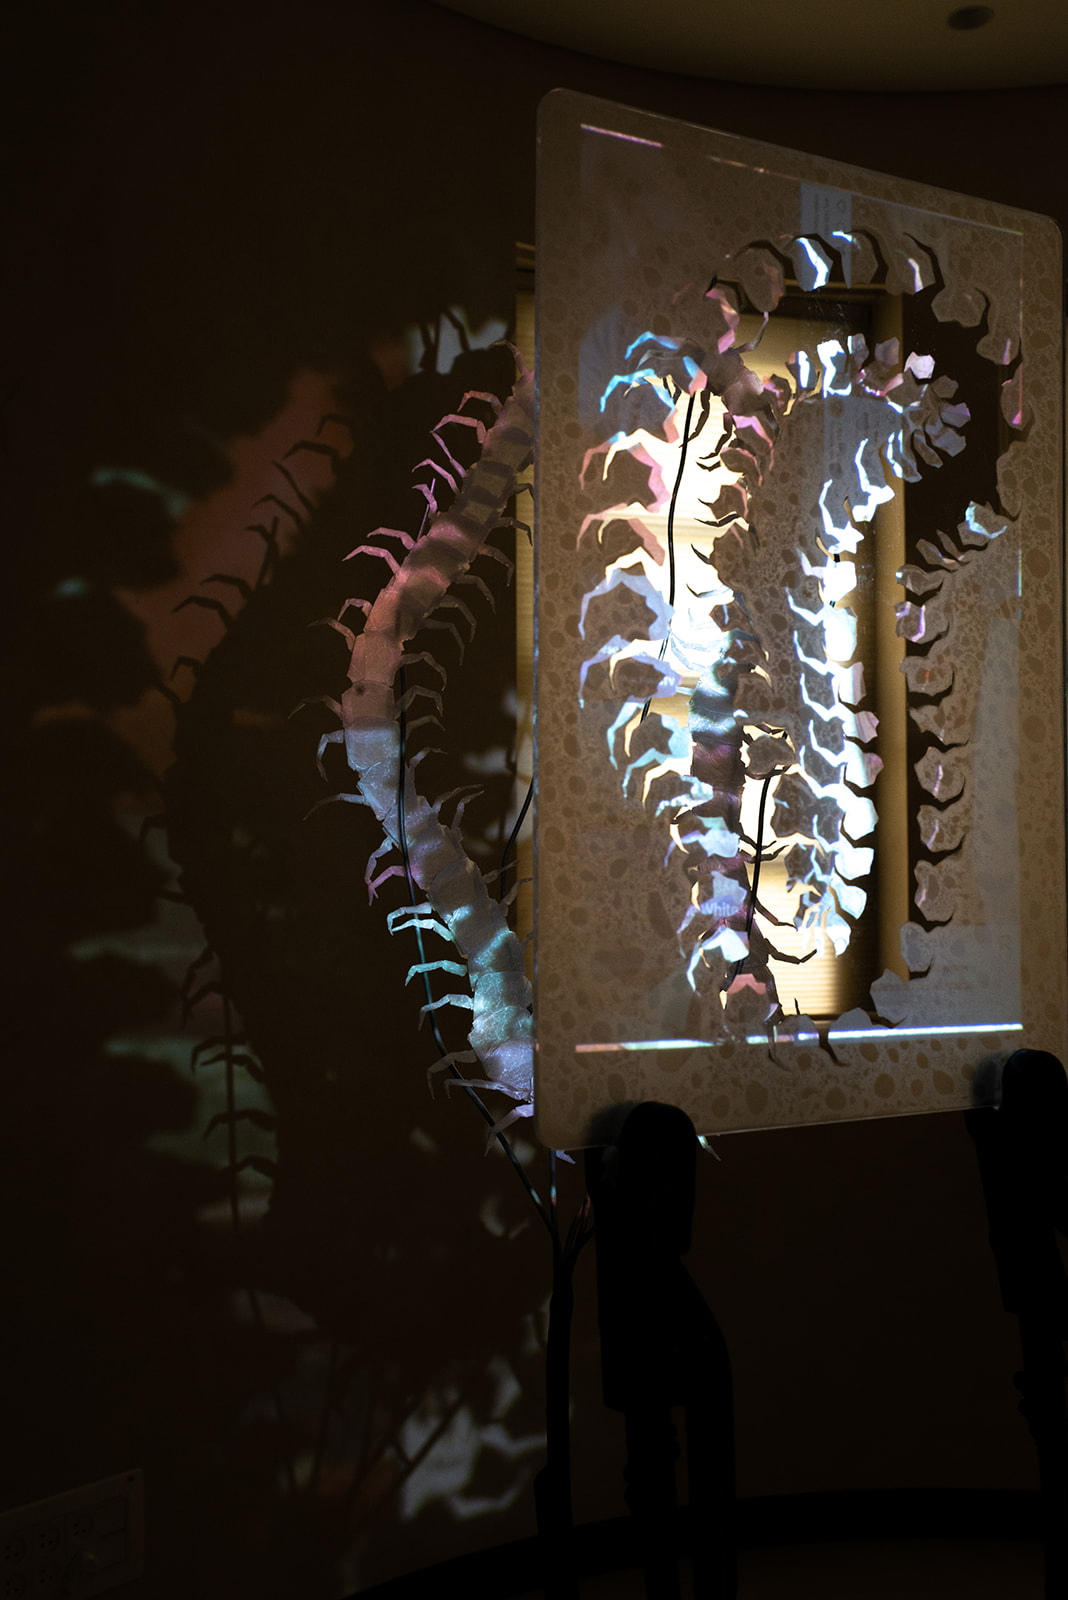 Natalia Nosova, Molting Down, 2022, video projection on sculpted paper<br />
Photography: Neta Cones